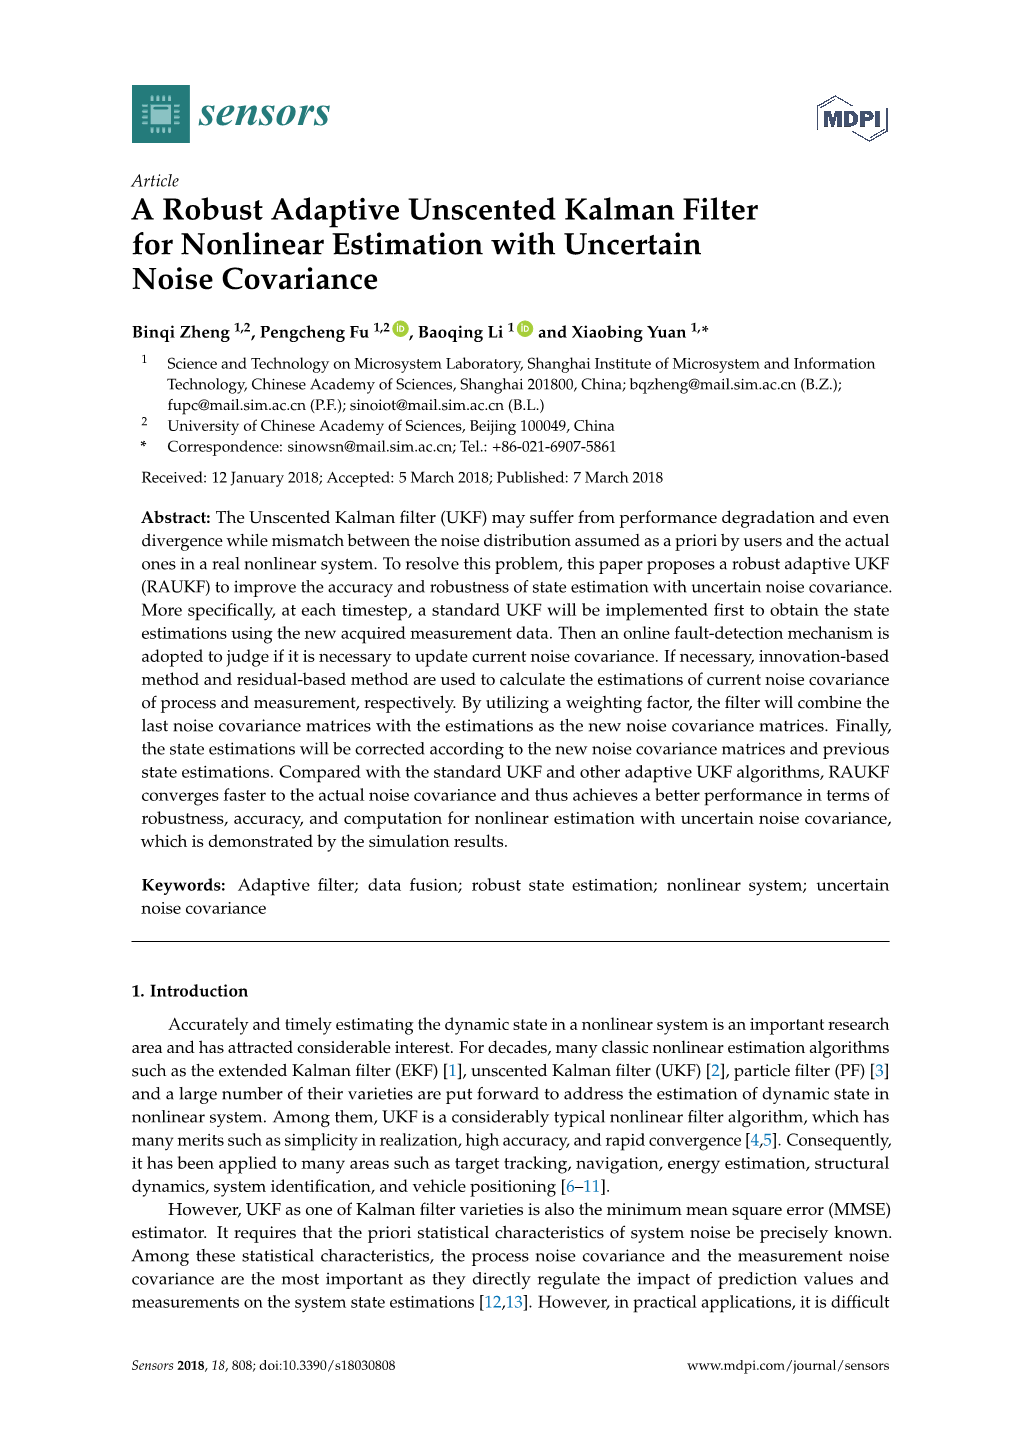 A Robust Adaptive Unscented Kalman Filter for Nonlinear Estimation with Uncertain Noise Covariance